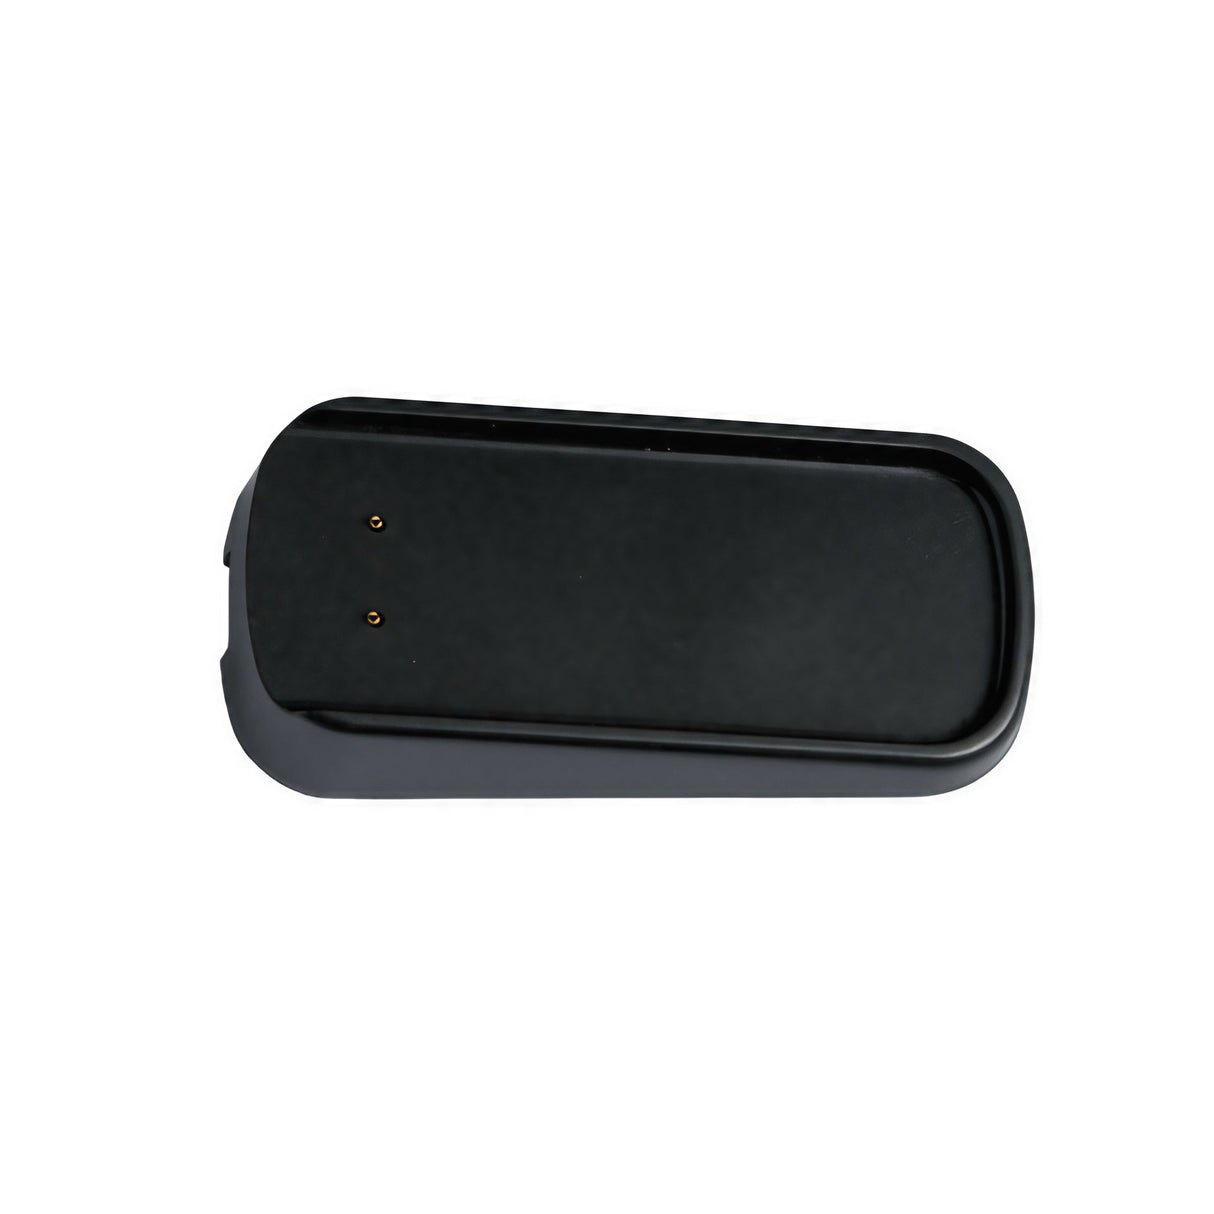 Firefly 2+ sleek black charging dock top view, essential vape accessory for easy charging